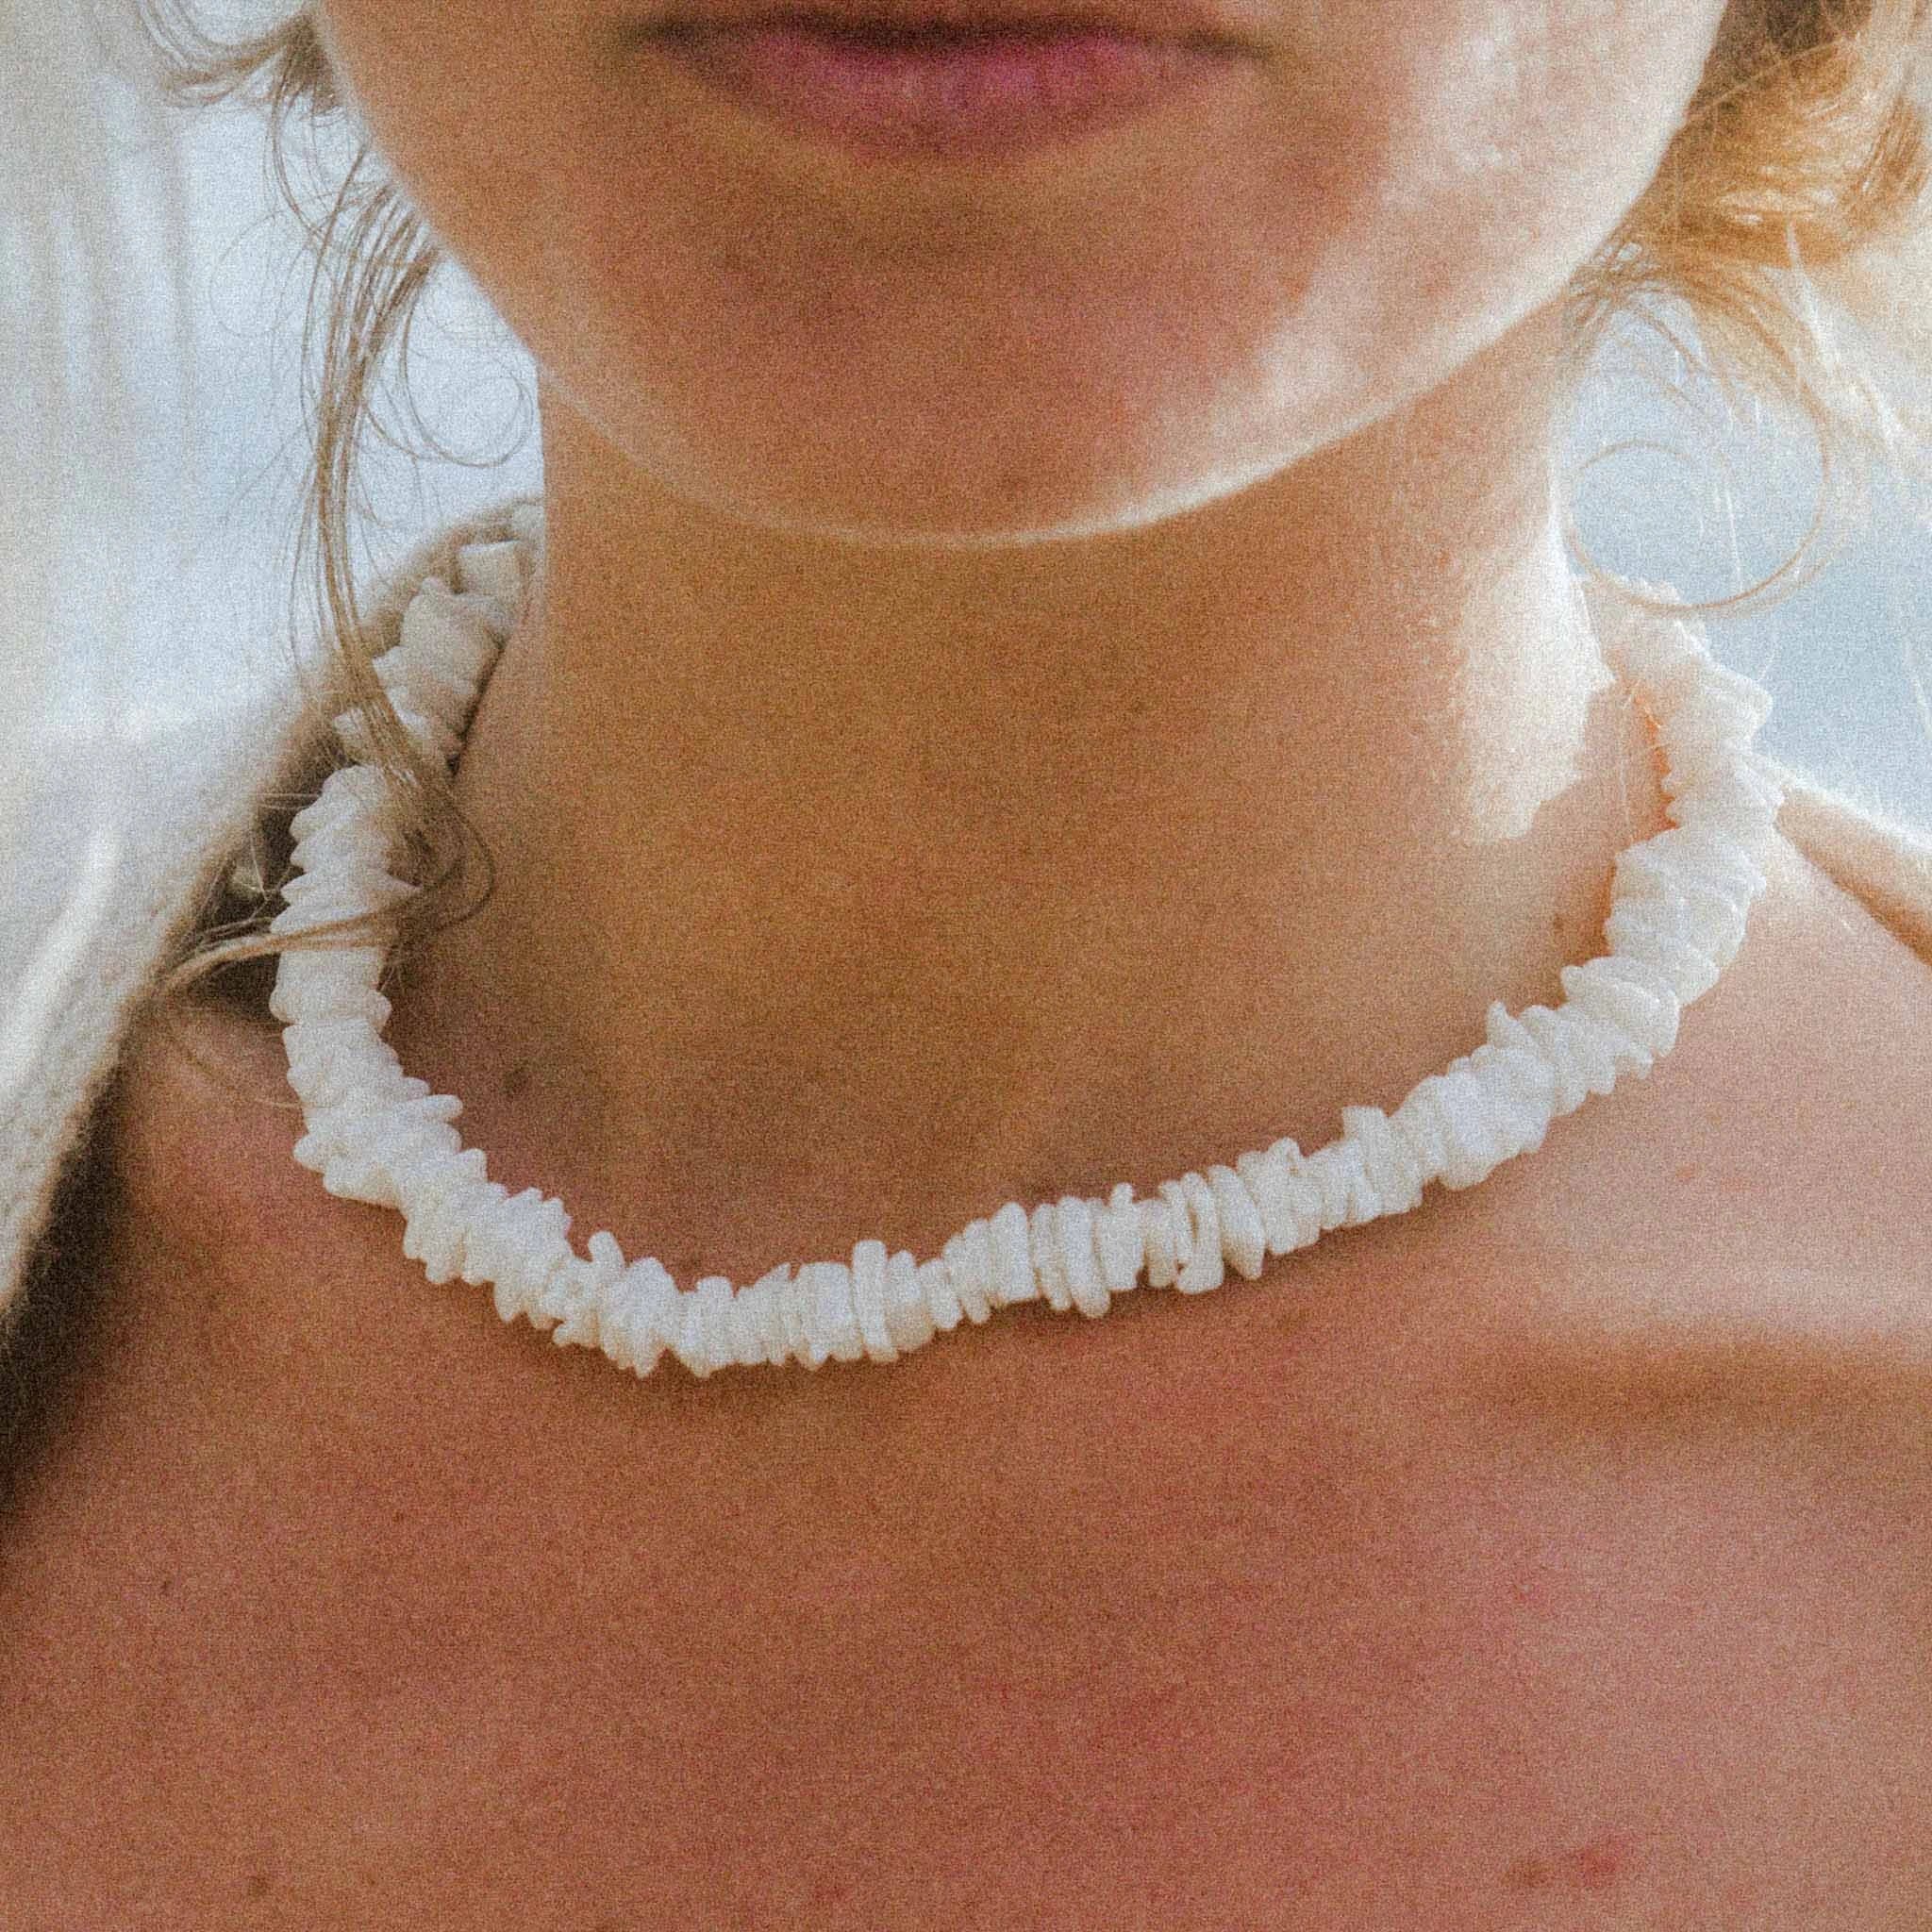 90s jewelry: a guide to puka shell necklace & other 90s jewelry trends | 90s  jewelry, 90s jewelry trends, 90s hip hop fashion